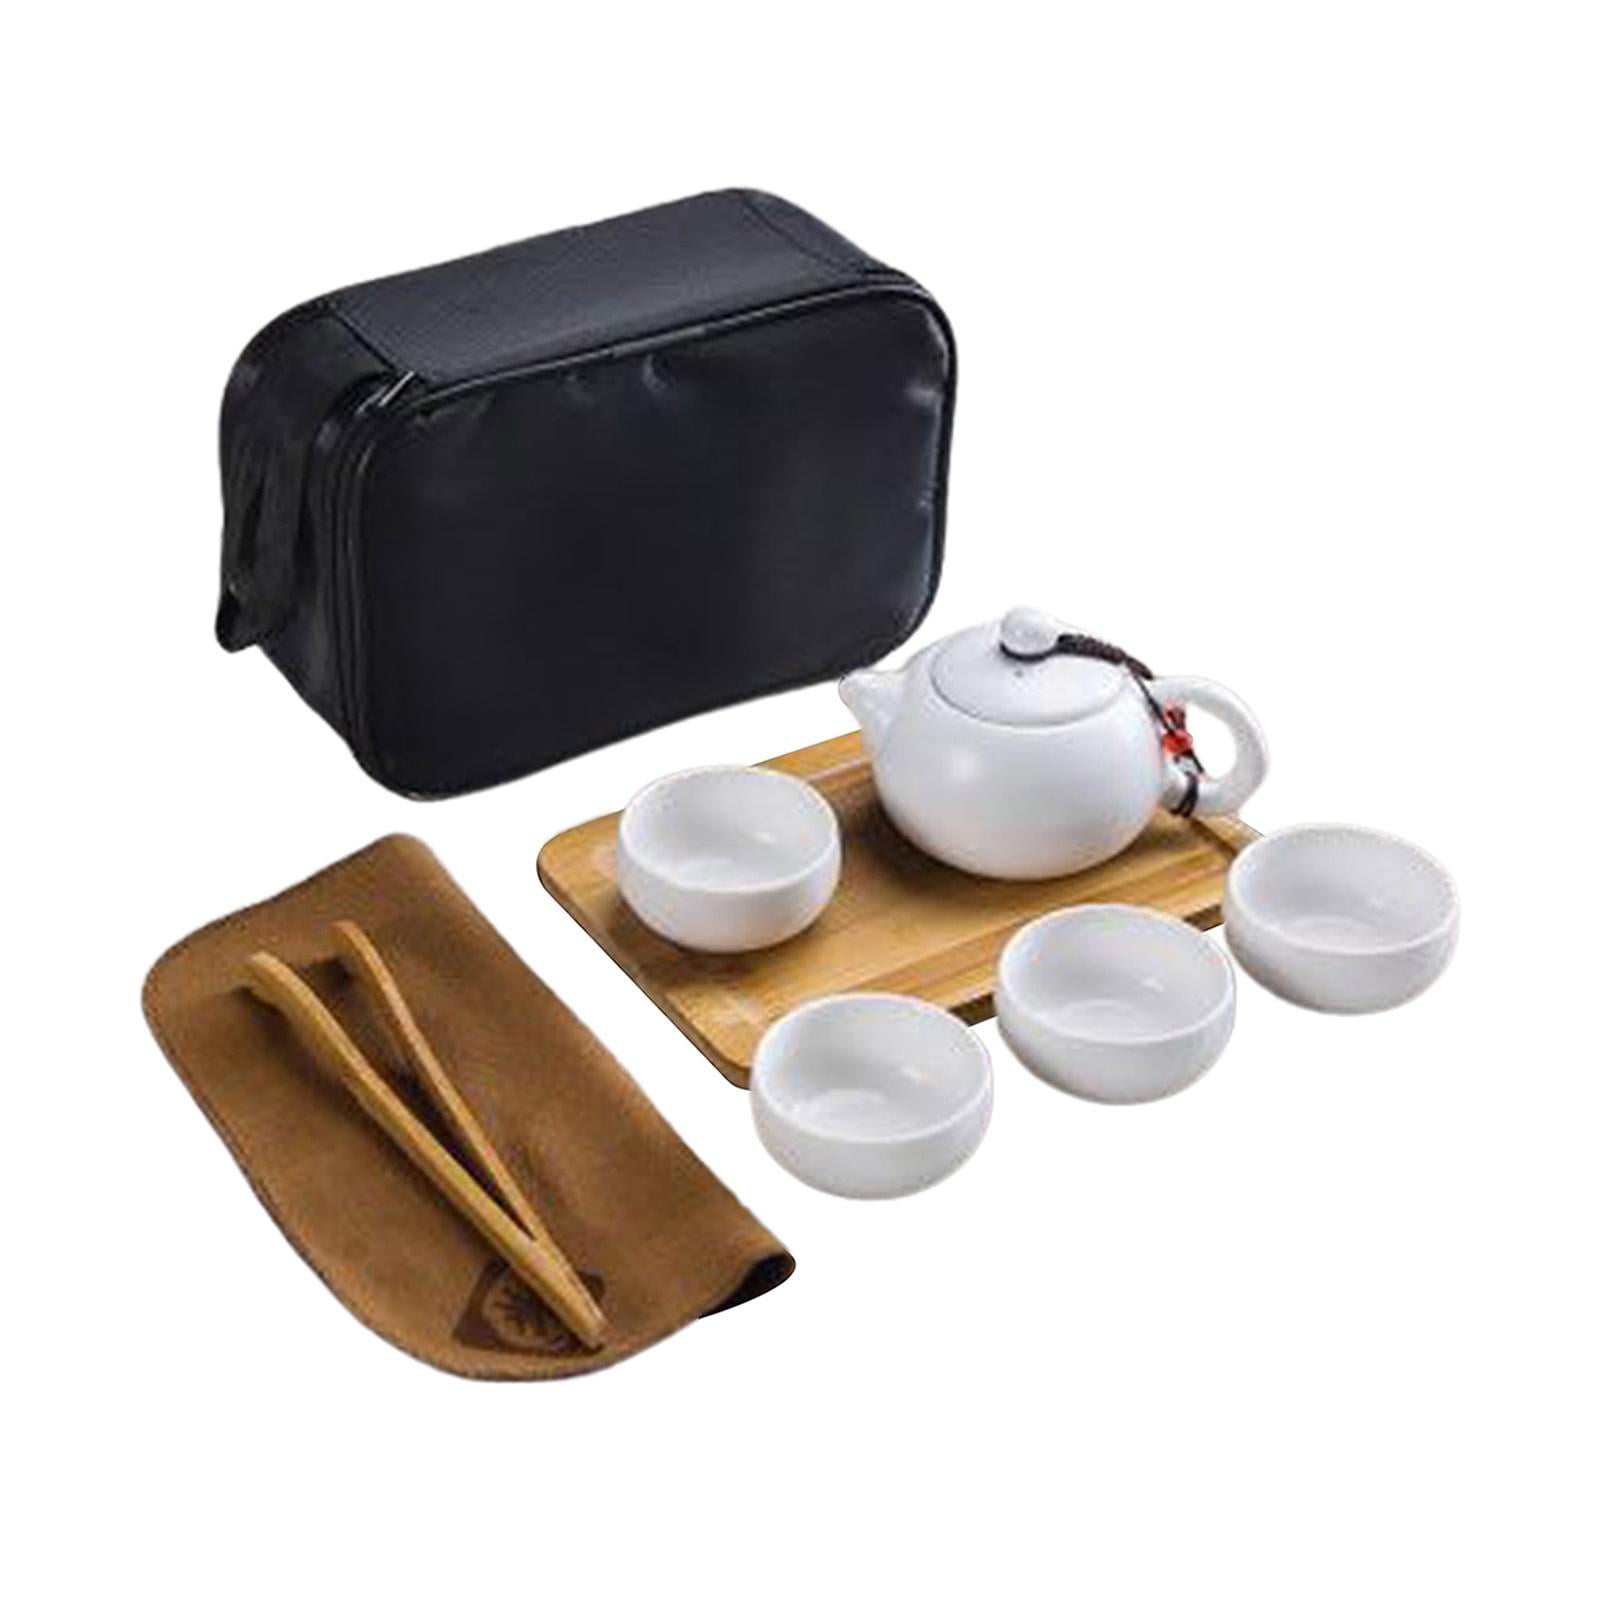 Ceramic Teaset Infuser Set Porcelain Teapot Set Portable Gift Bag All in One for Outdoor Picnic Business Hotel Travel Chinese Tea Cup Set with Handle Black 